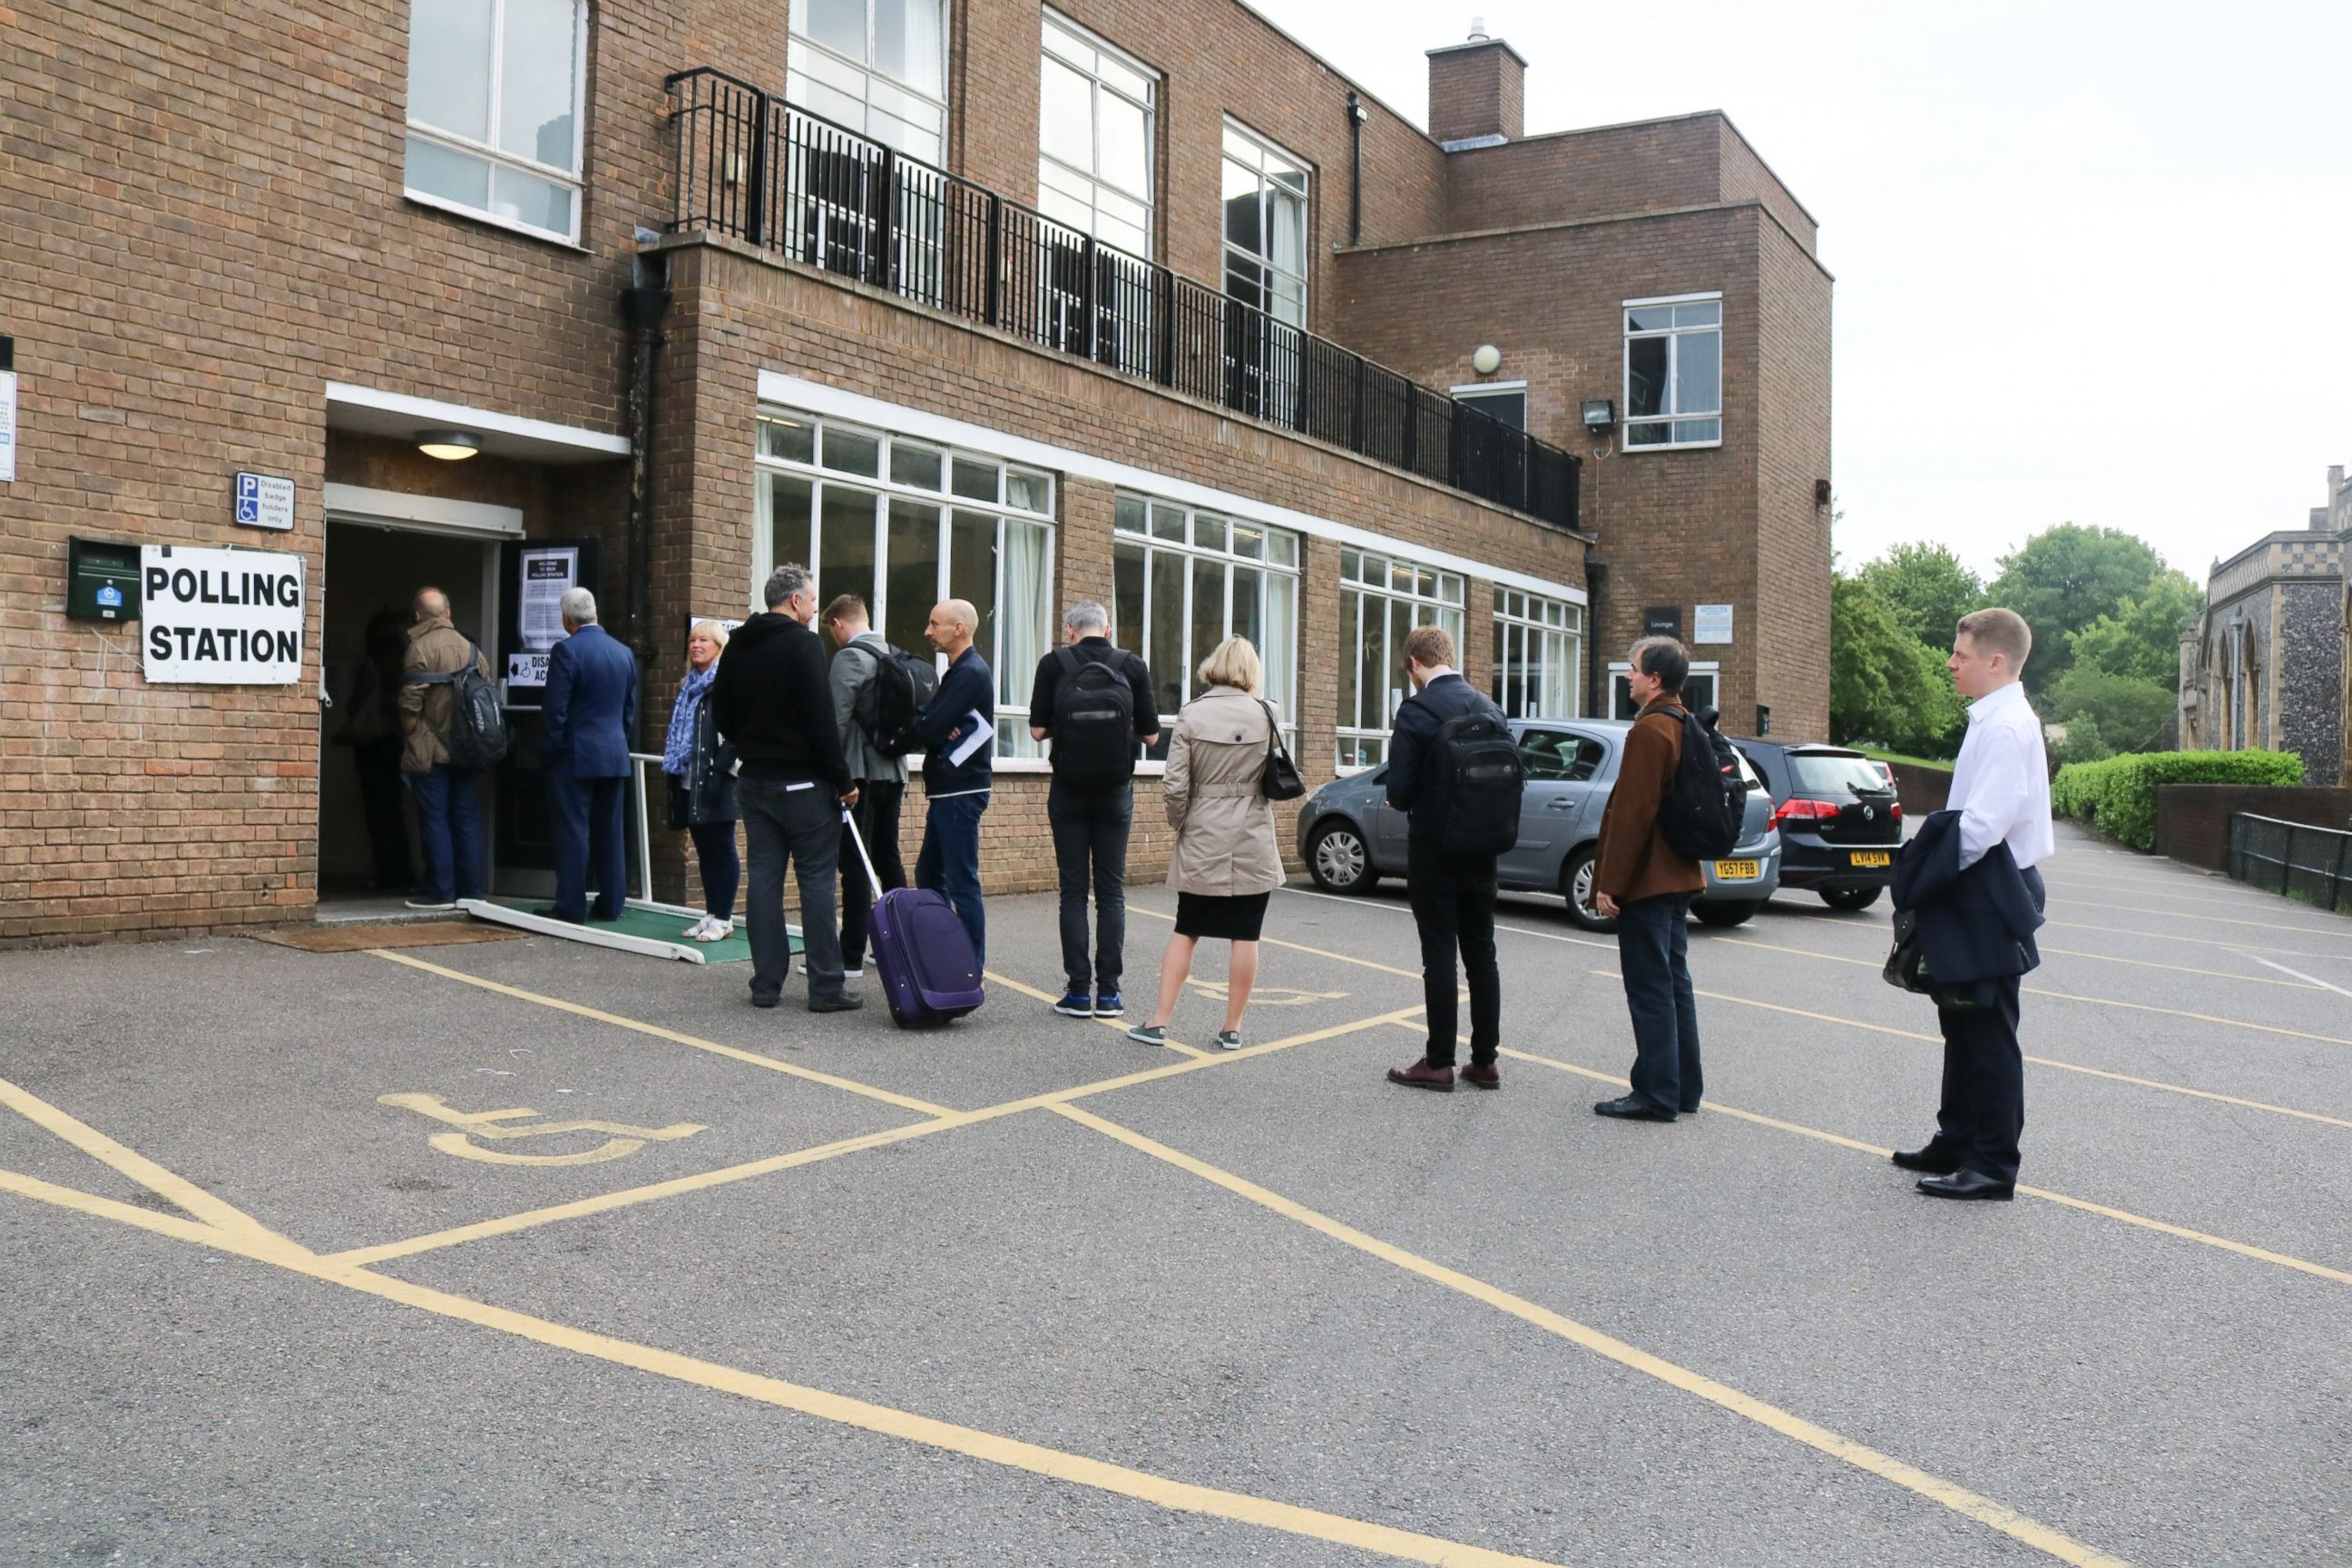 PHOTO: Voters line up at the polling station in Sacred Heart church Wimbledon to cast their vote at the general election, June 8, 2017, in London.
